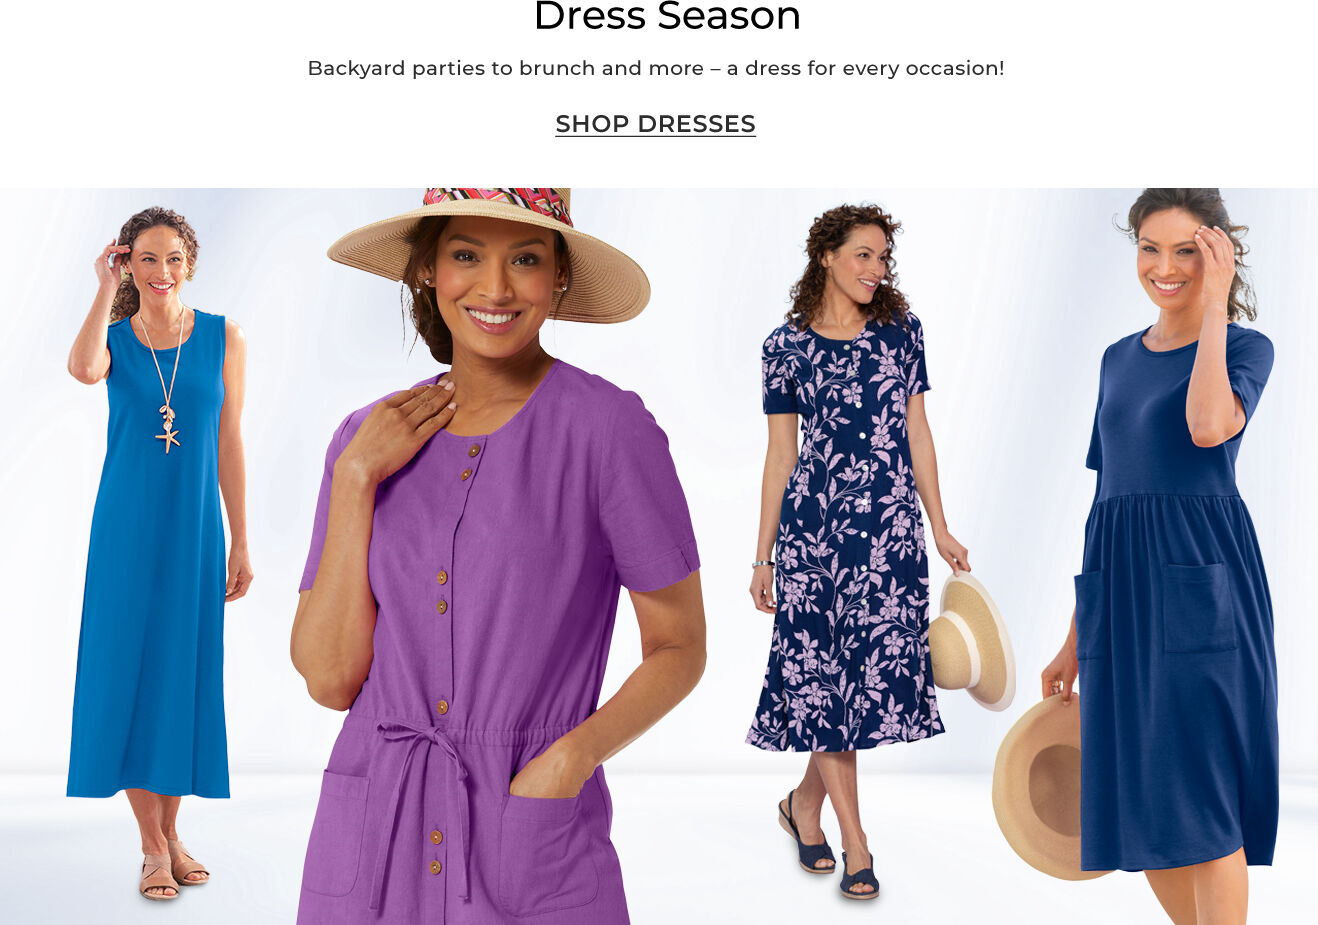 dress season backyard parties to brunch and more - a dress for every occasion! shop dresses